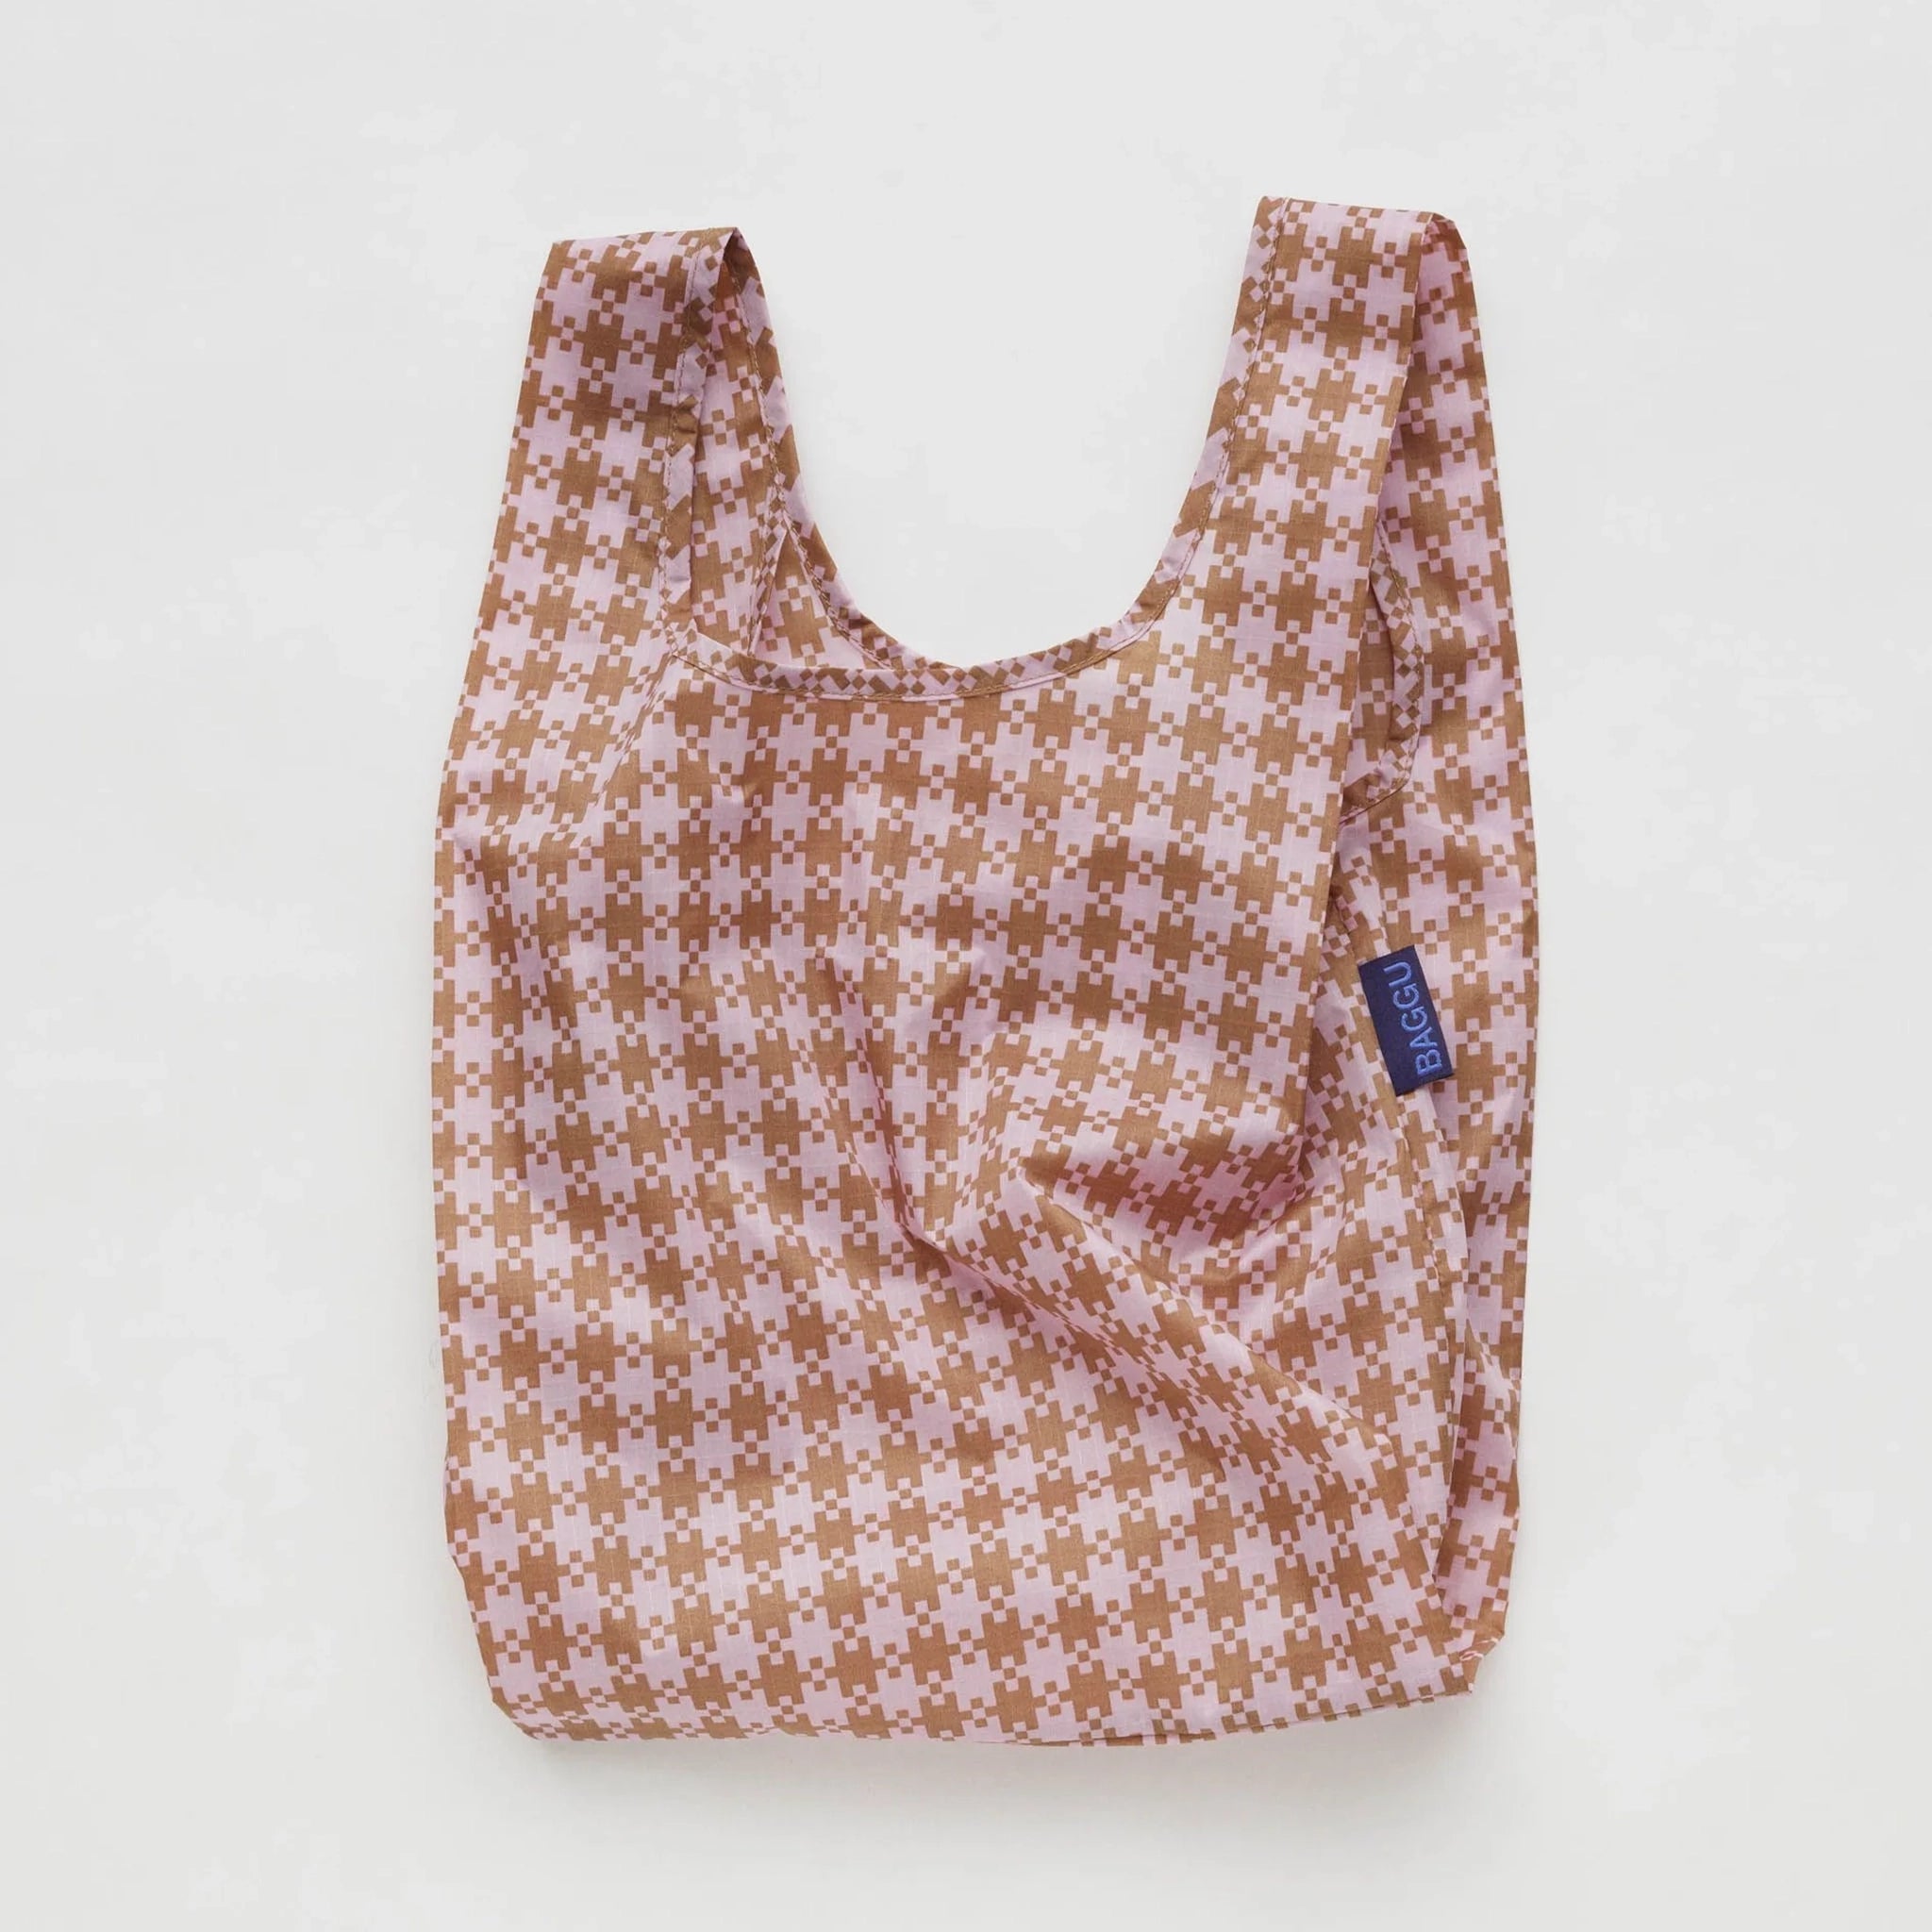 On a white background is a pink and tan gingham print tote bag made out of nylon.